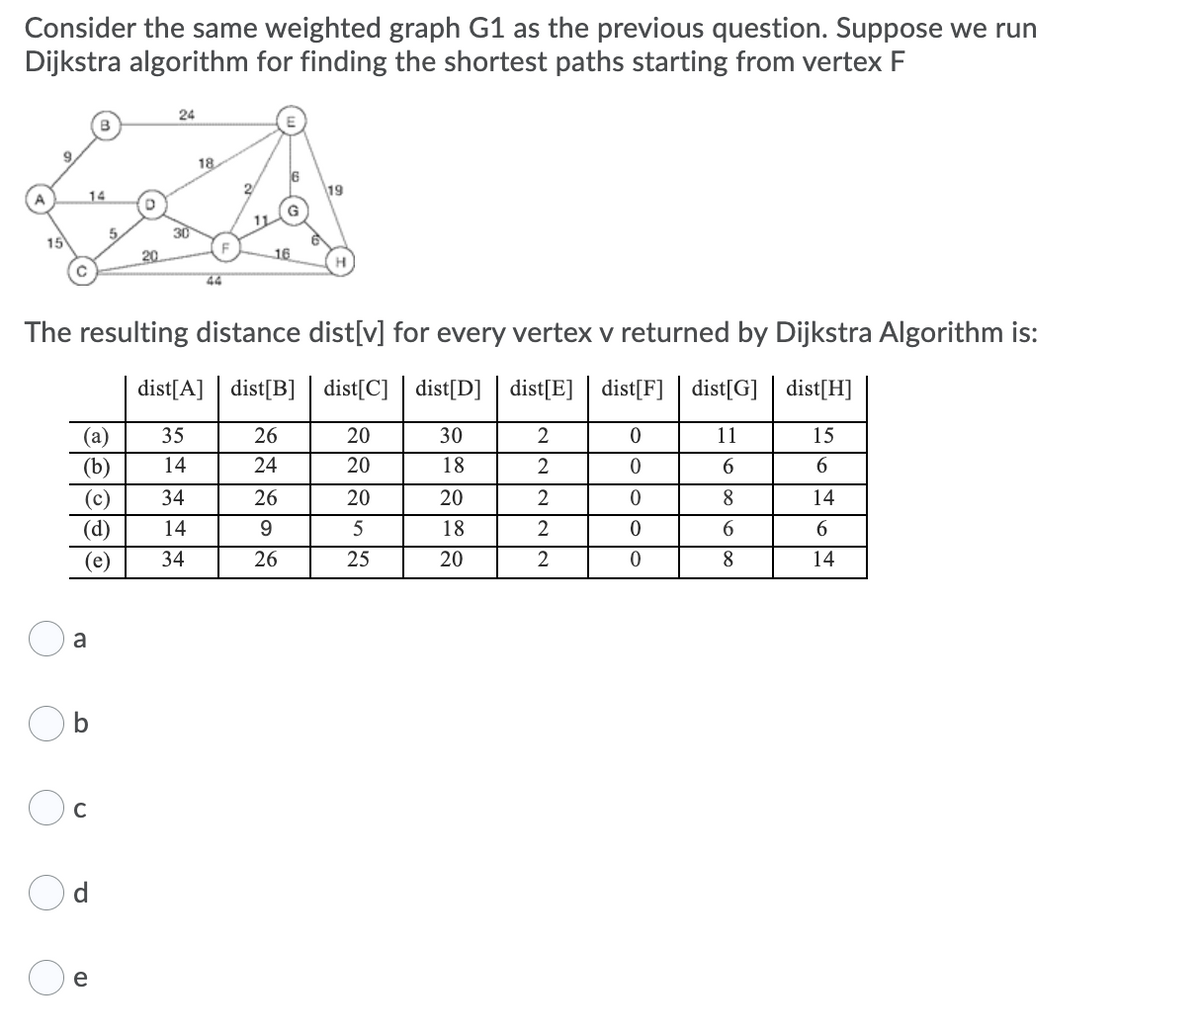 Consider the same weighted graph G1 as the previous question. Suppose we run
Dijkstra algorithm for finding the shortest paths starting from vertex F
24
18
6
19
14
5.
30
15
20
16
C
The resulting distance dist[v] for every vertex v returned by Dijkstra Algorithm is:
dist[A] | dist[B] | dist[C] | dist[D] | dist[E] | dist[F] | dist[G] | dist[H]
(a)
(b)
35
26
20
30
2
11
15
14
24
20
18
6.
6.
(c)
(d)
34
26
20
20
2
8
14
14
9.
5
18
2
6.
6
(e)
34
26
25
20
2
8
14
a
e
C.
